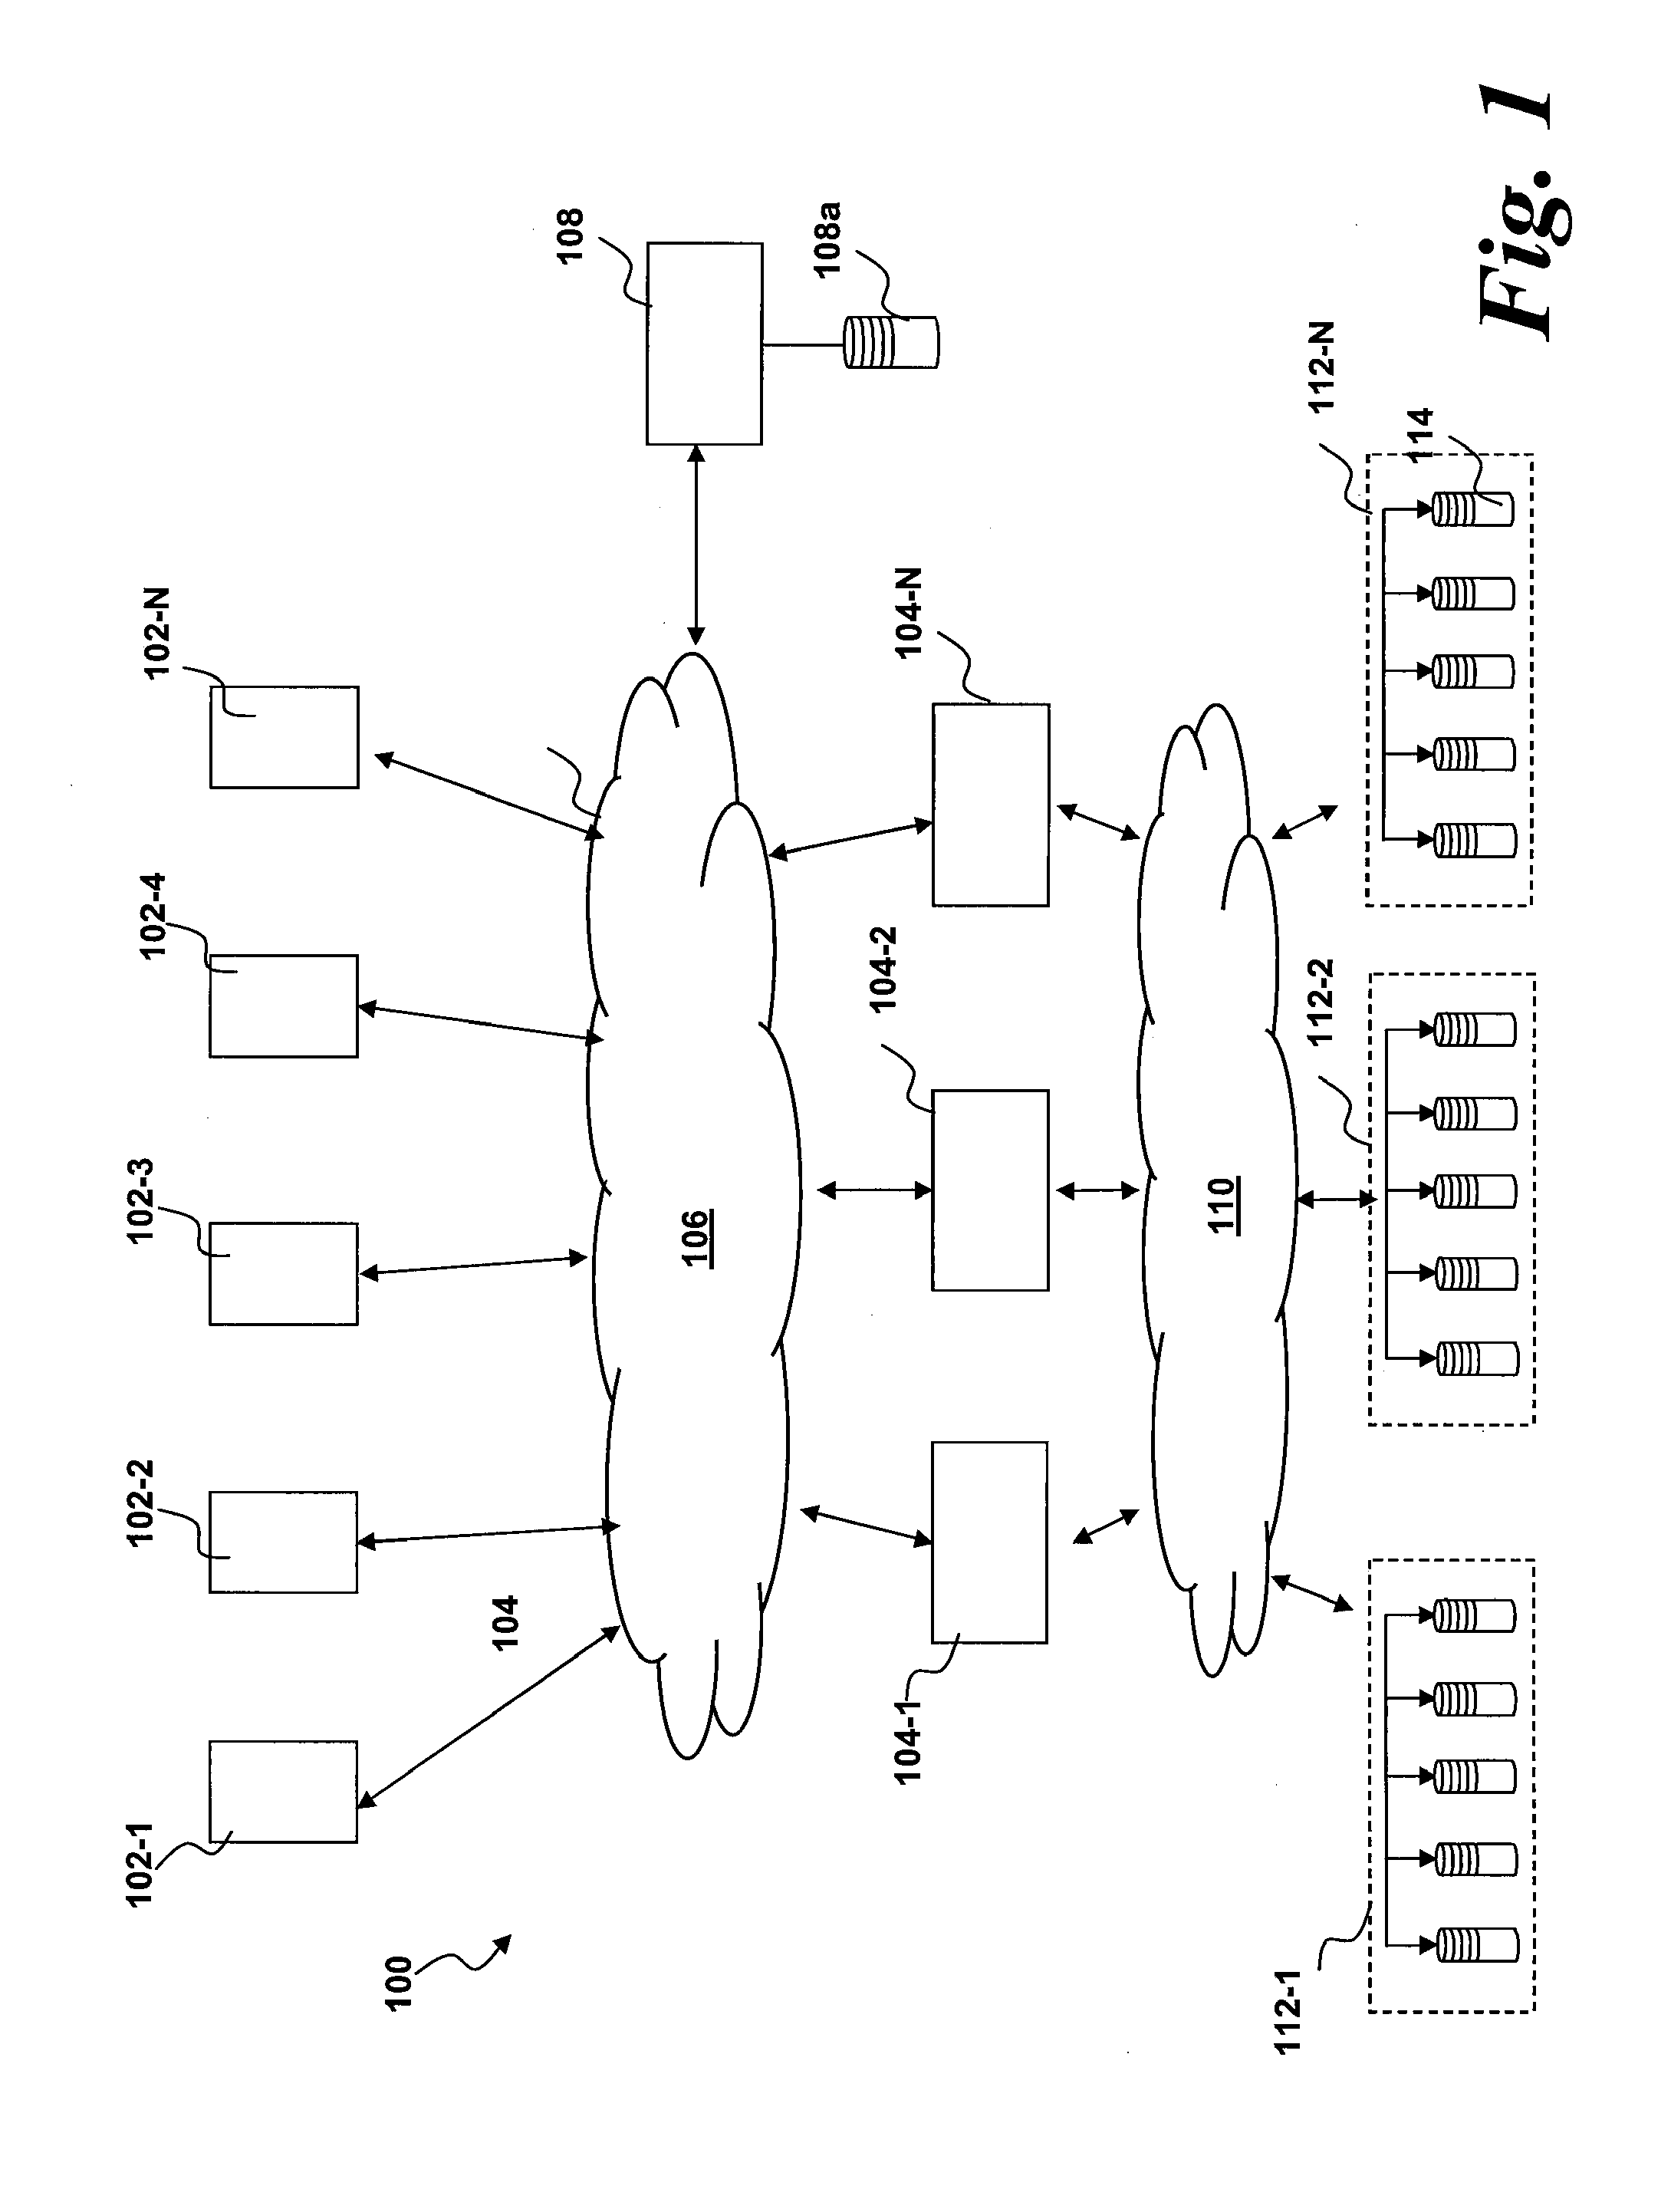 Method of, and apparatus for, improved data integrity in a networked storage system